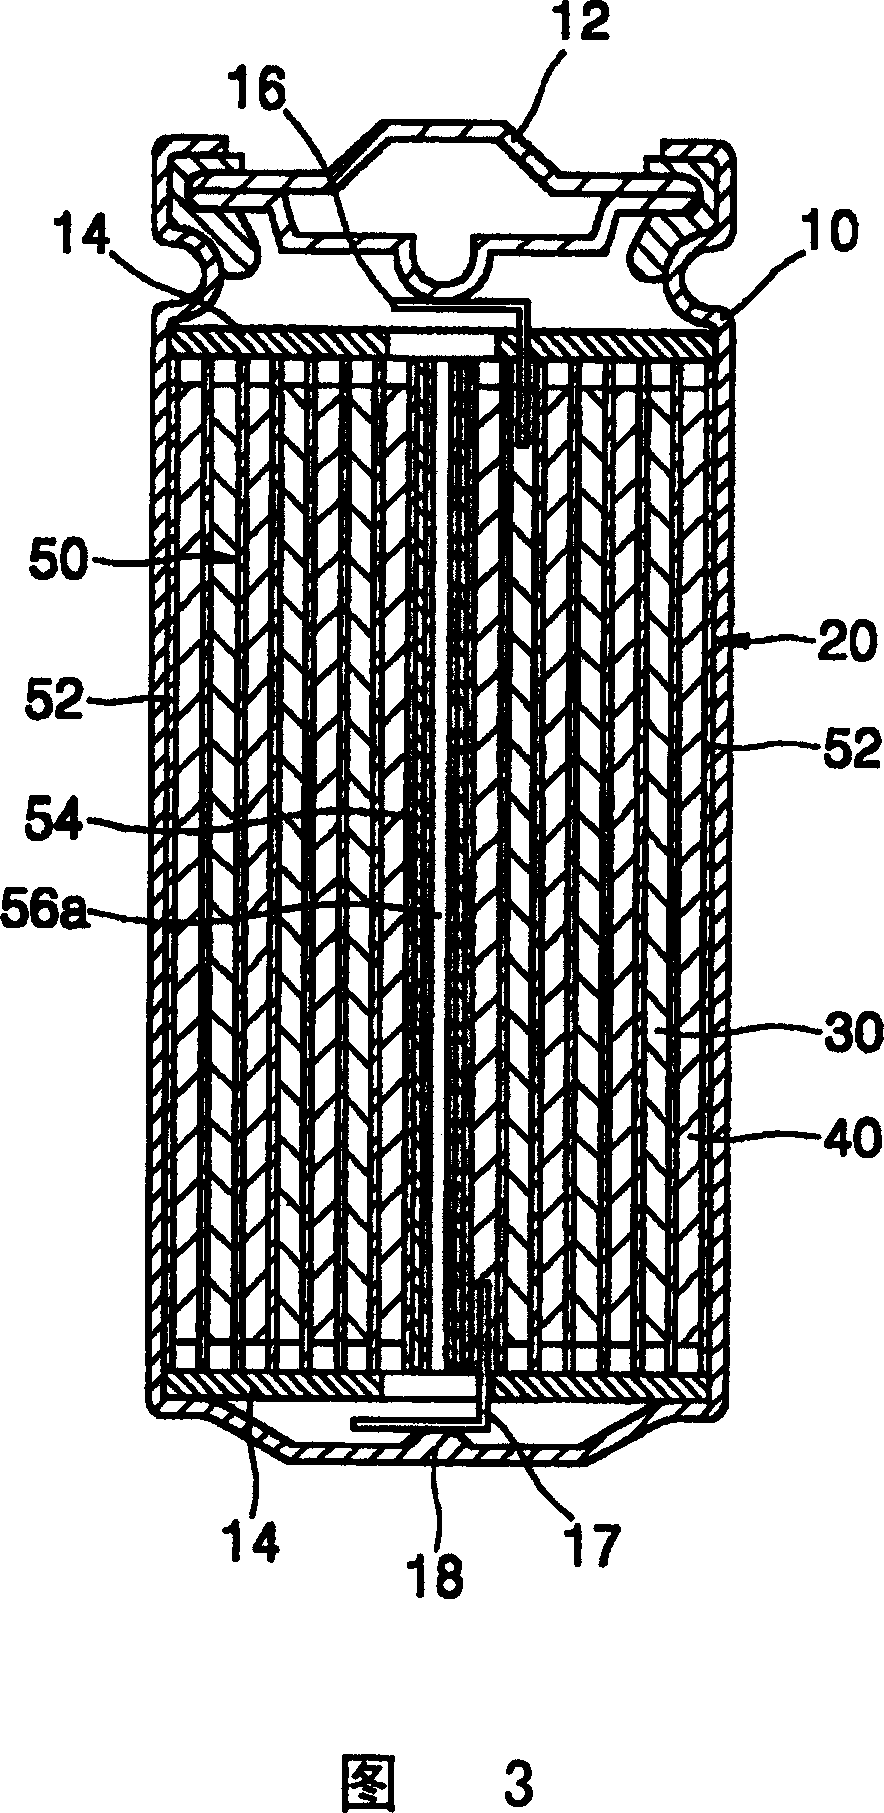 Secondary battery with improved film-like electrode structure